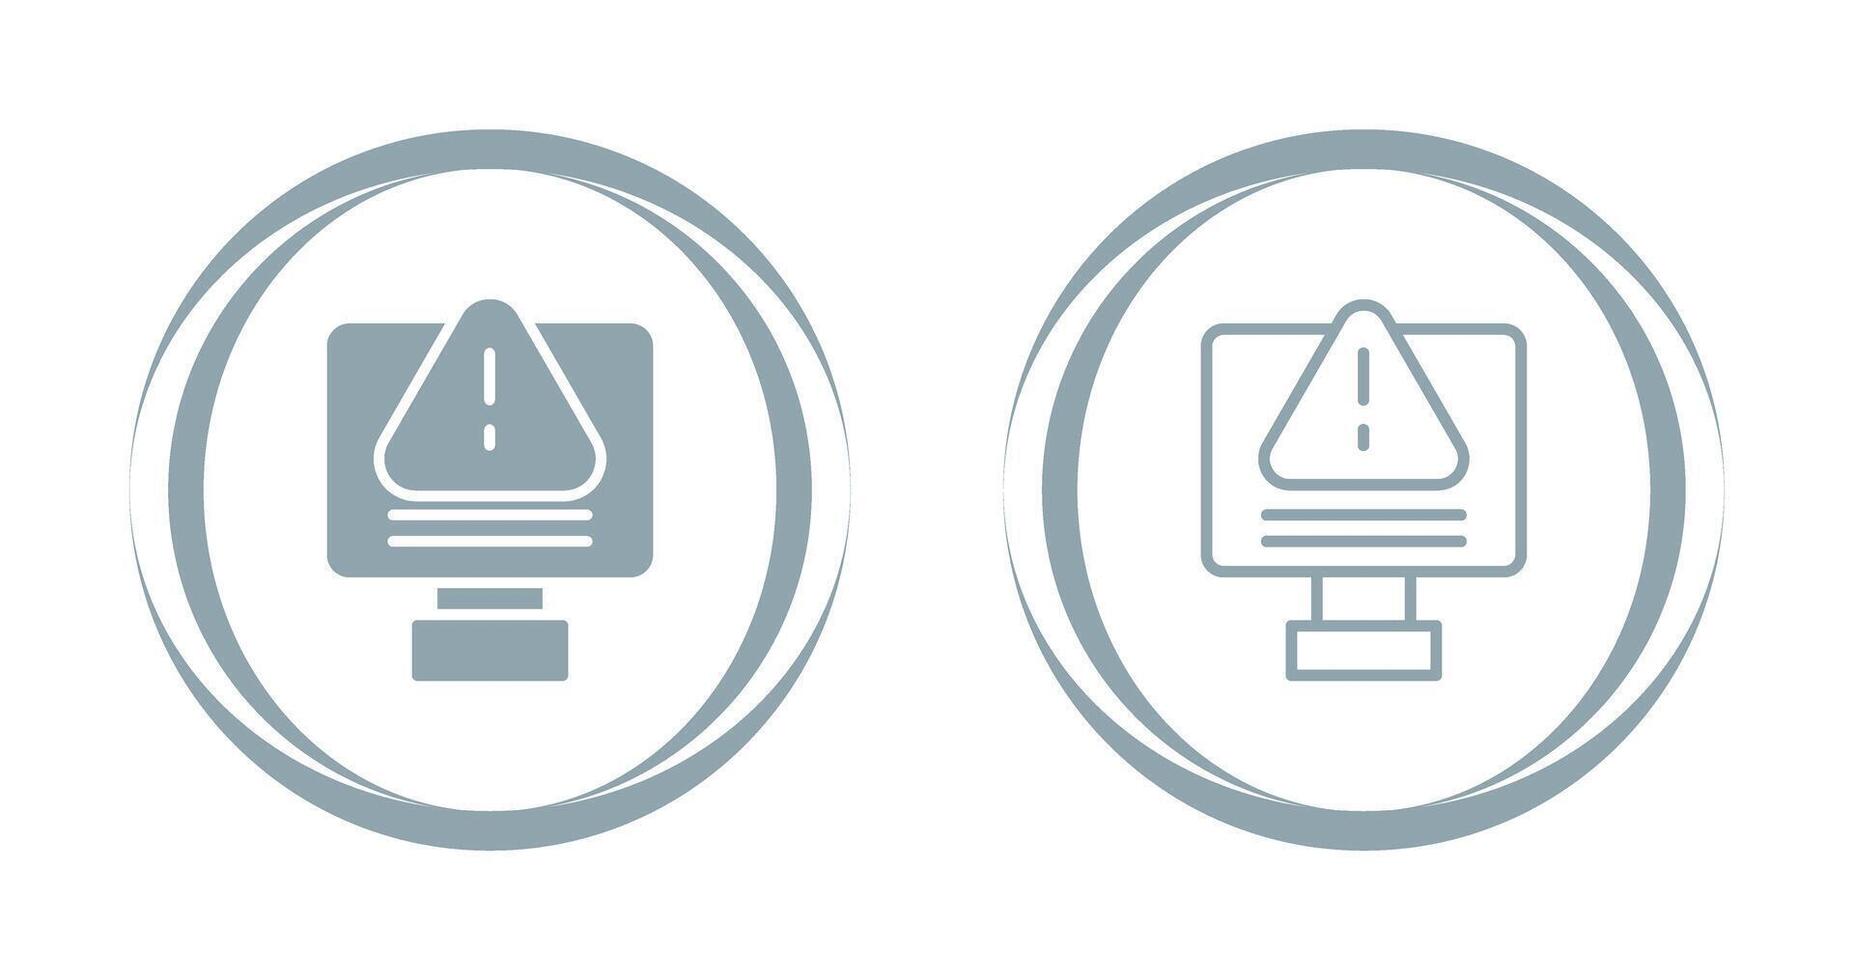 IT System Failure Vector Icon